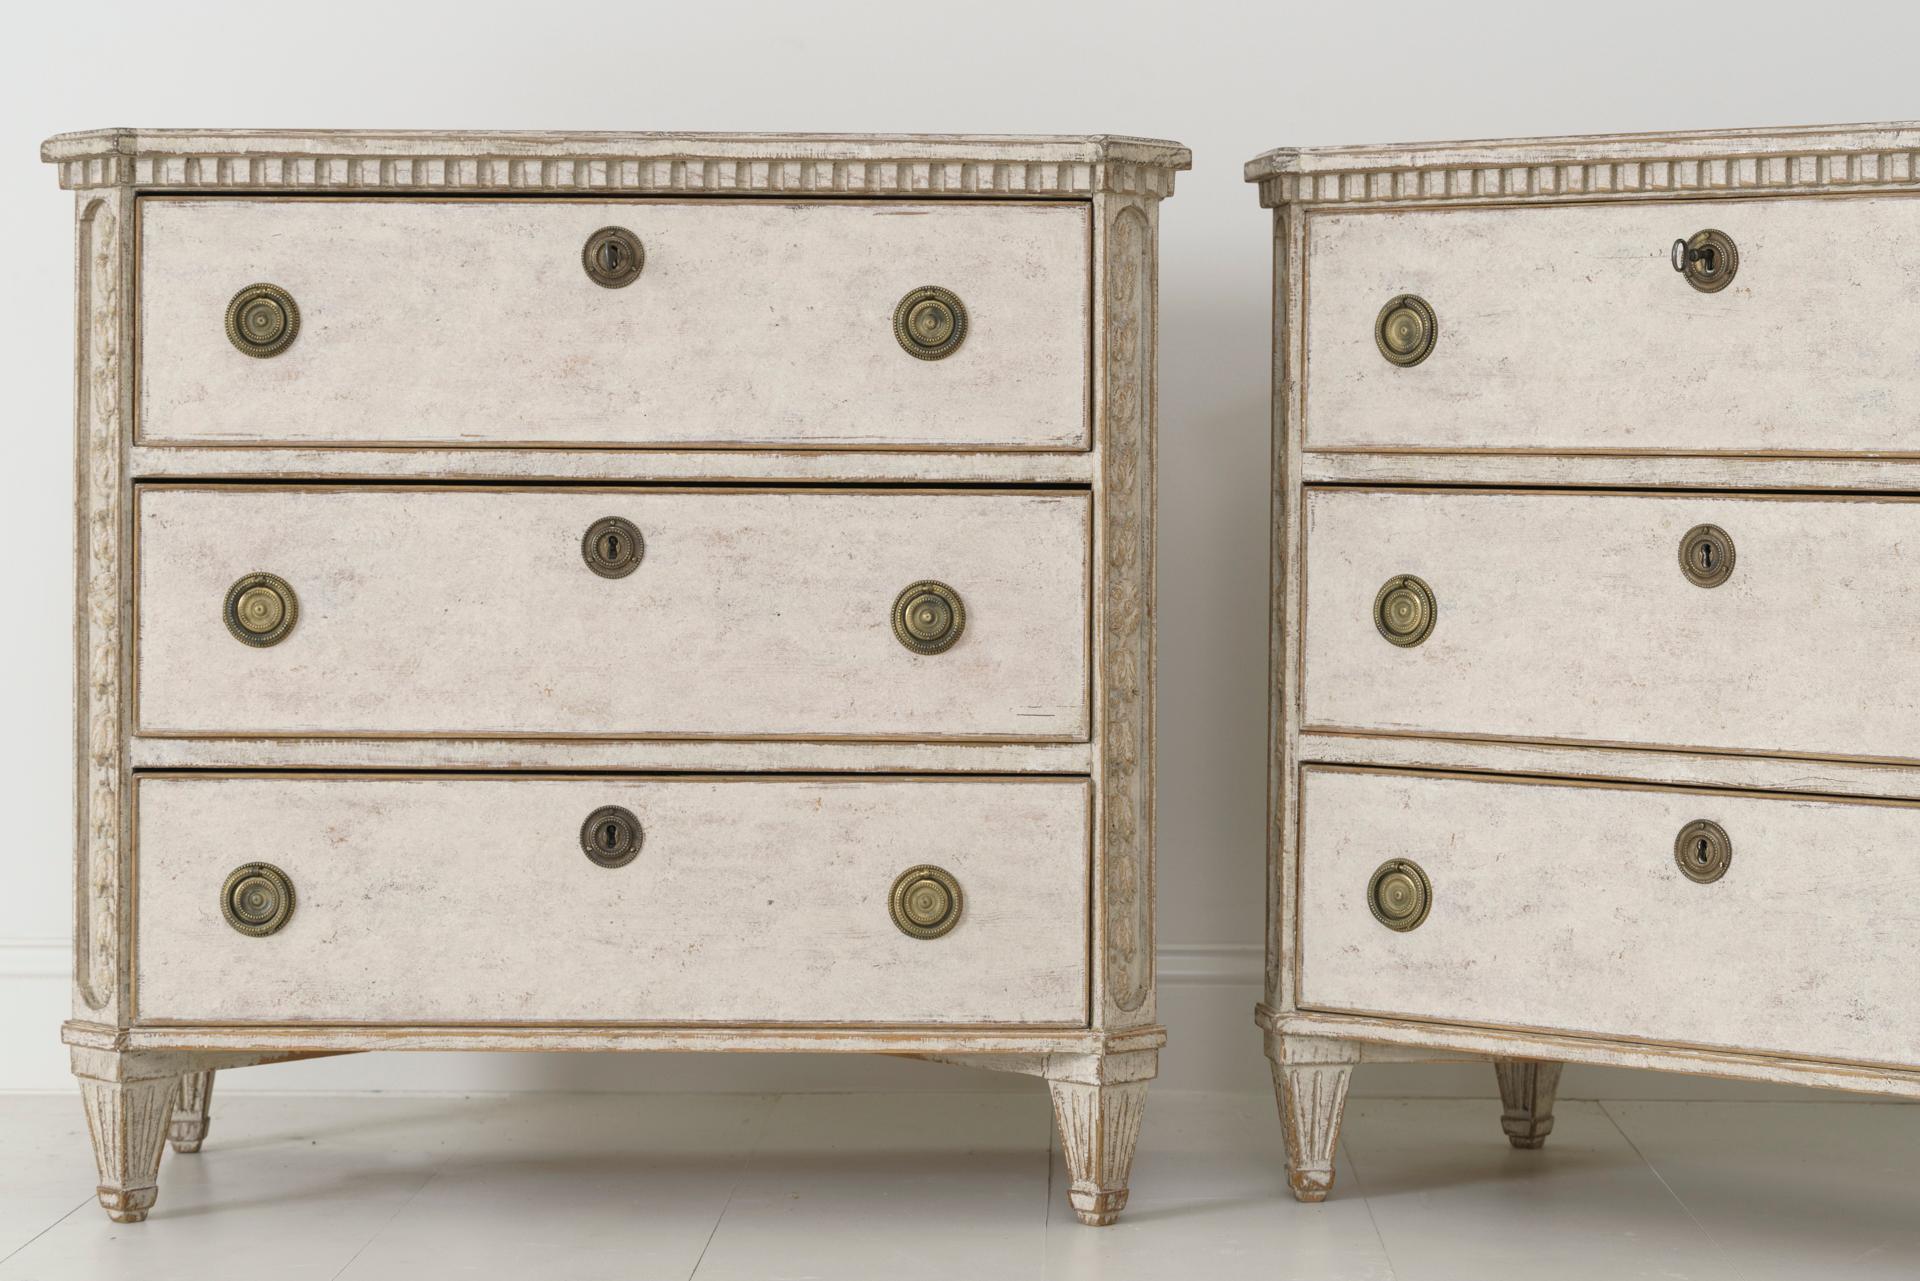 A pair of Swedish chest of drawers in the Gustavian style from the 19th century with dentil molding around the top and beautiful bell flower carvings on both the front and back corner posts. Tapered and fluted legs. The patina is a soft taupe with